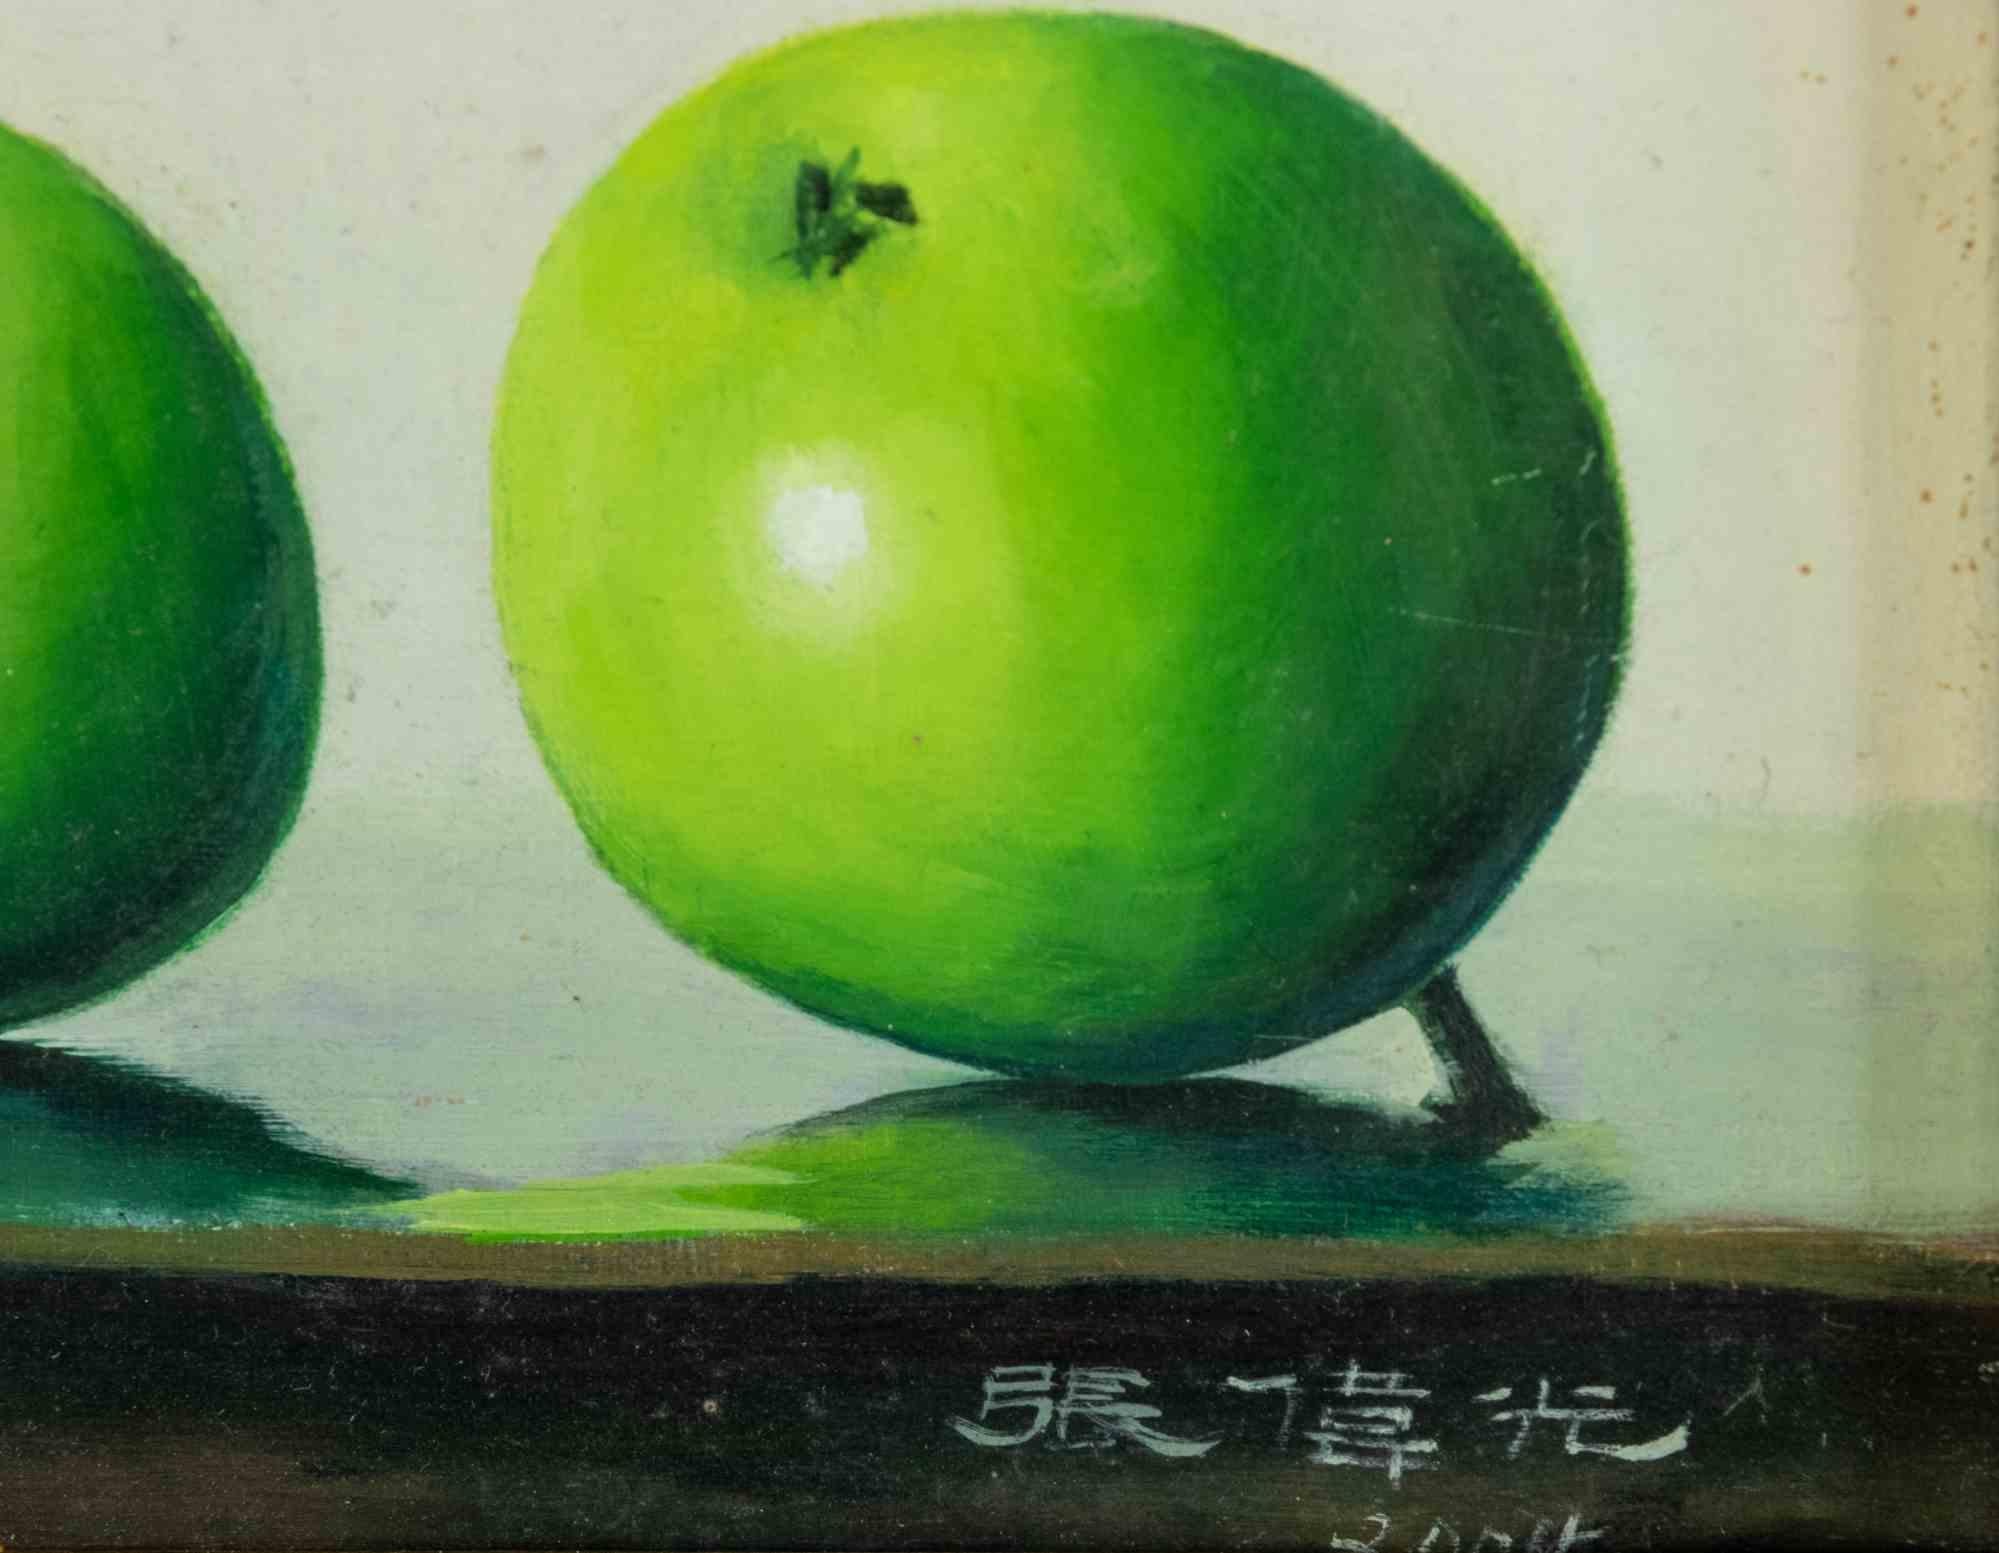 Green Apples is an oil painting on canvas realized in 2006 by Zhang Wei Guang (Mirror).

Includes frame:  83 X 6 X 70  cm

Hand-signed and dated on the lower right corner.

Excellent condition.

Zhang Wei Guang , also called ‘mirror' was born in